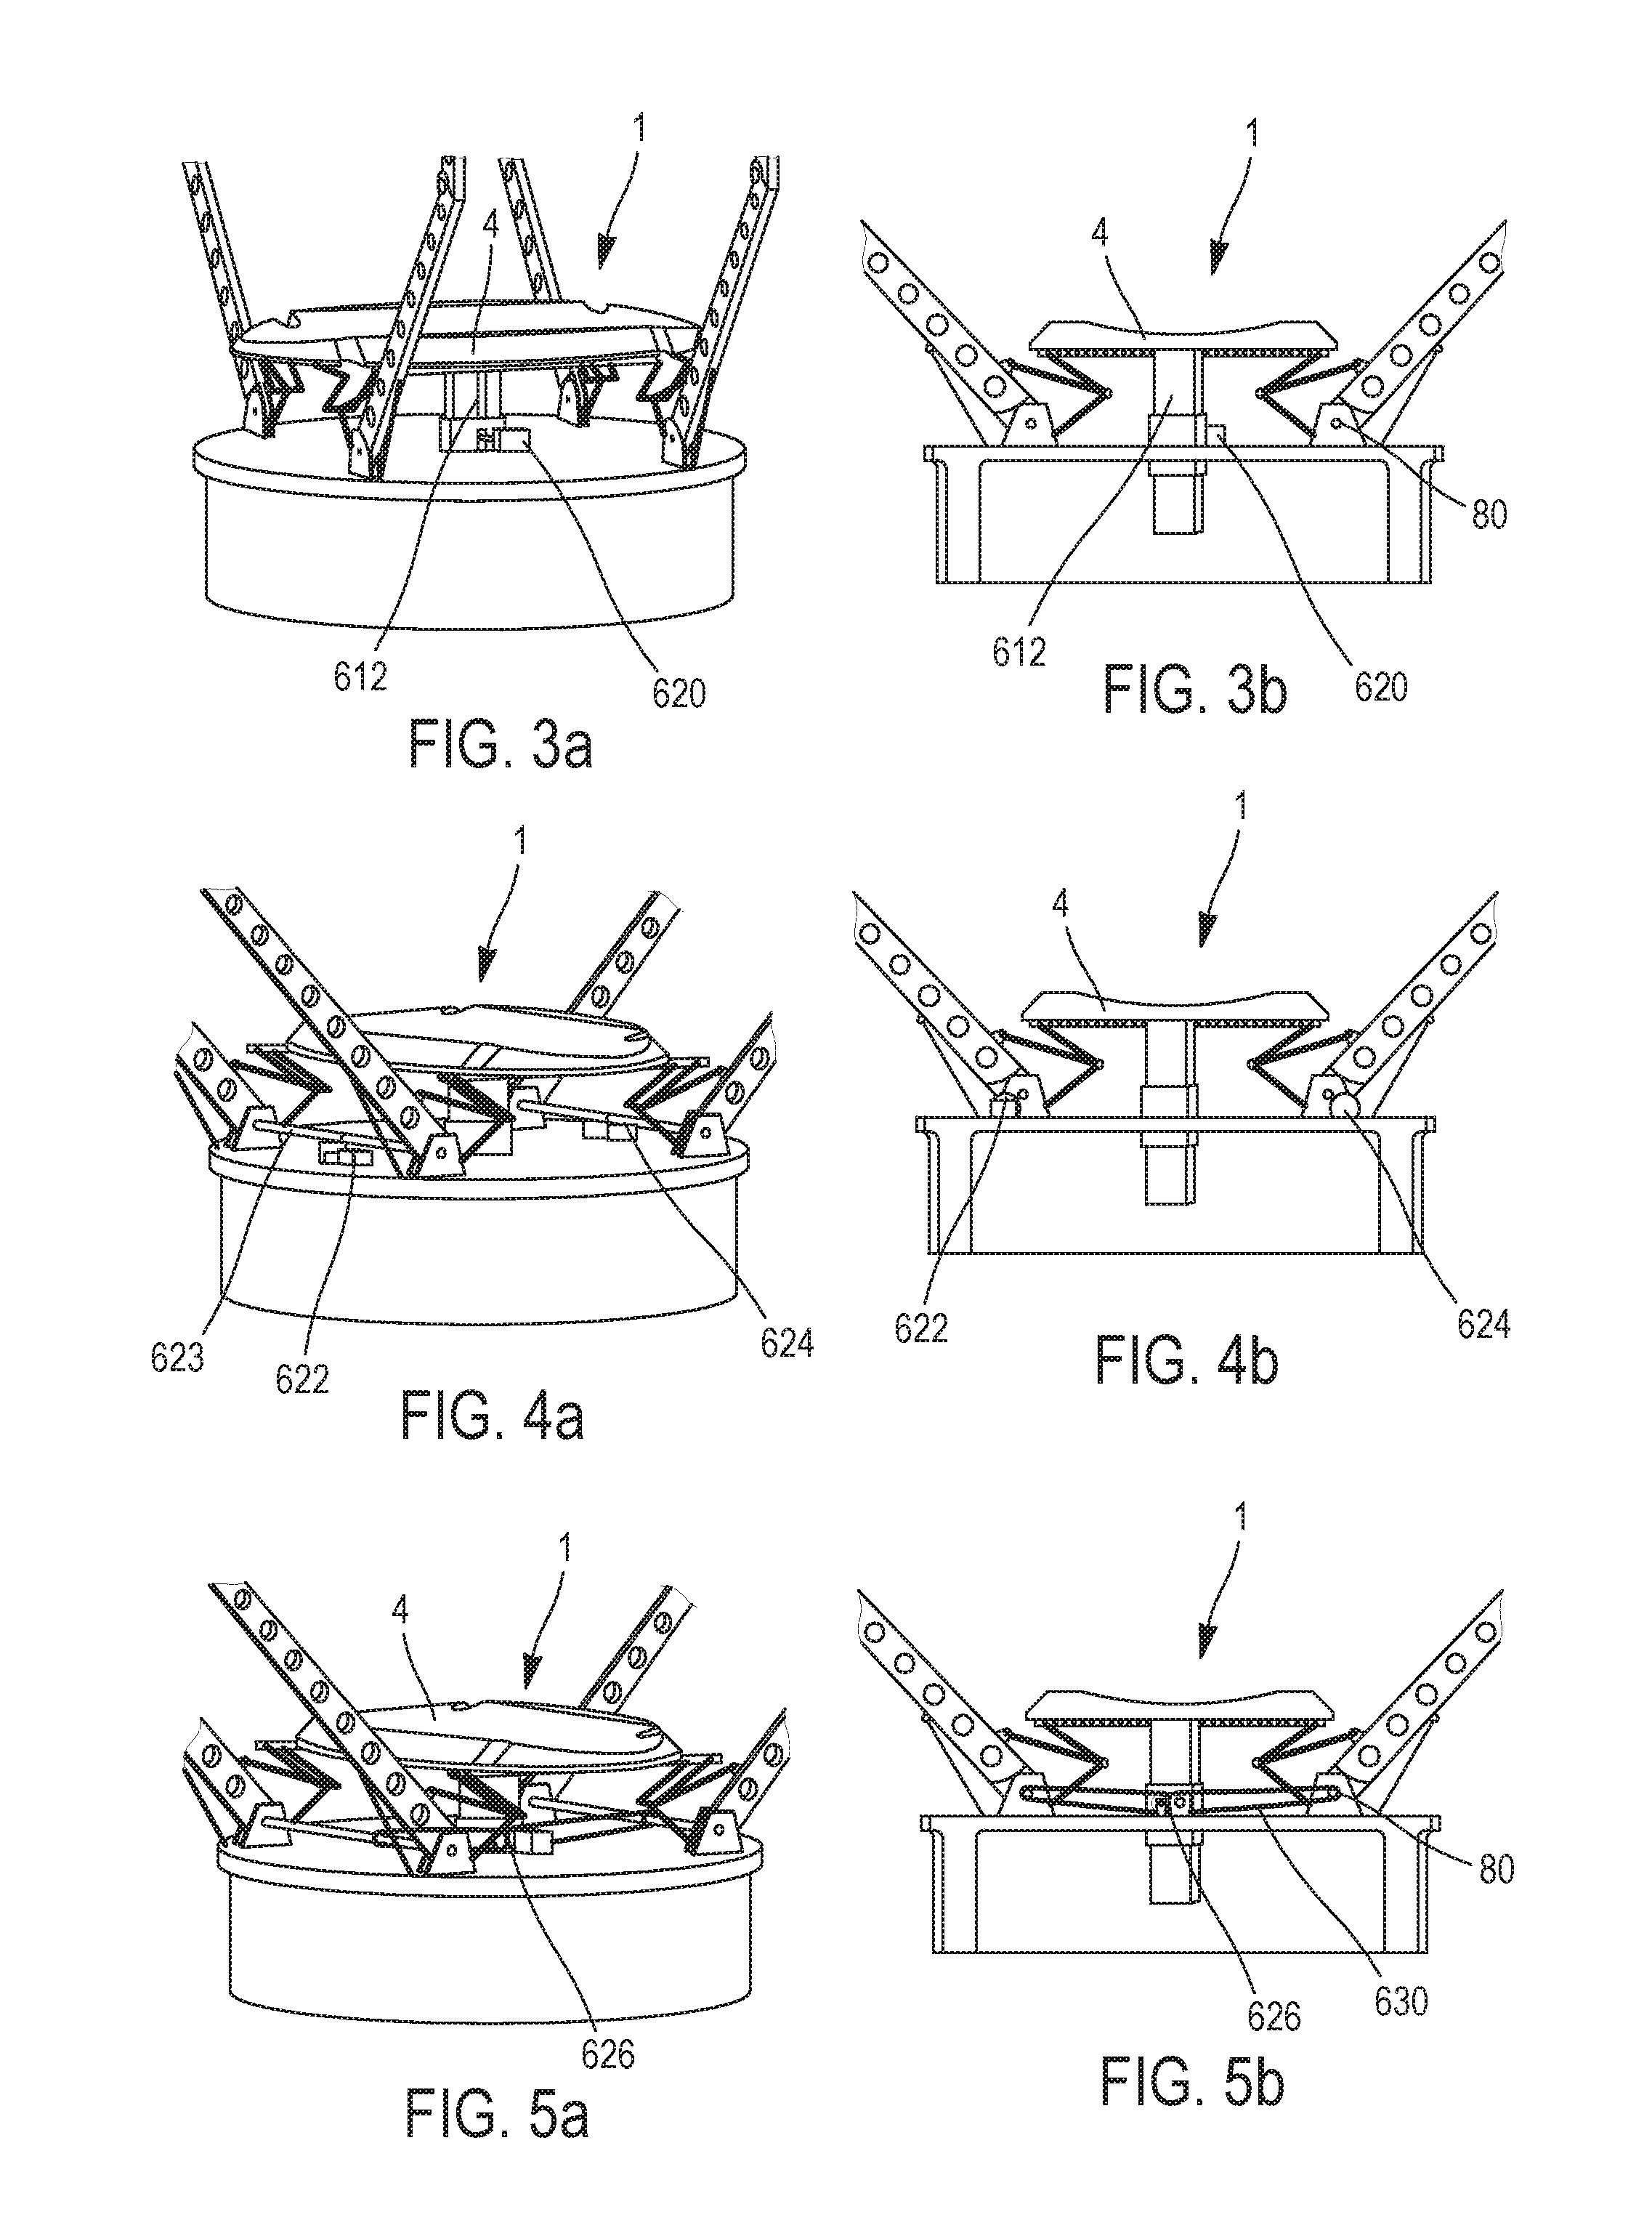 Device for sensing a space object, including a pressure element and at least two resealable elements on the space object